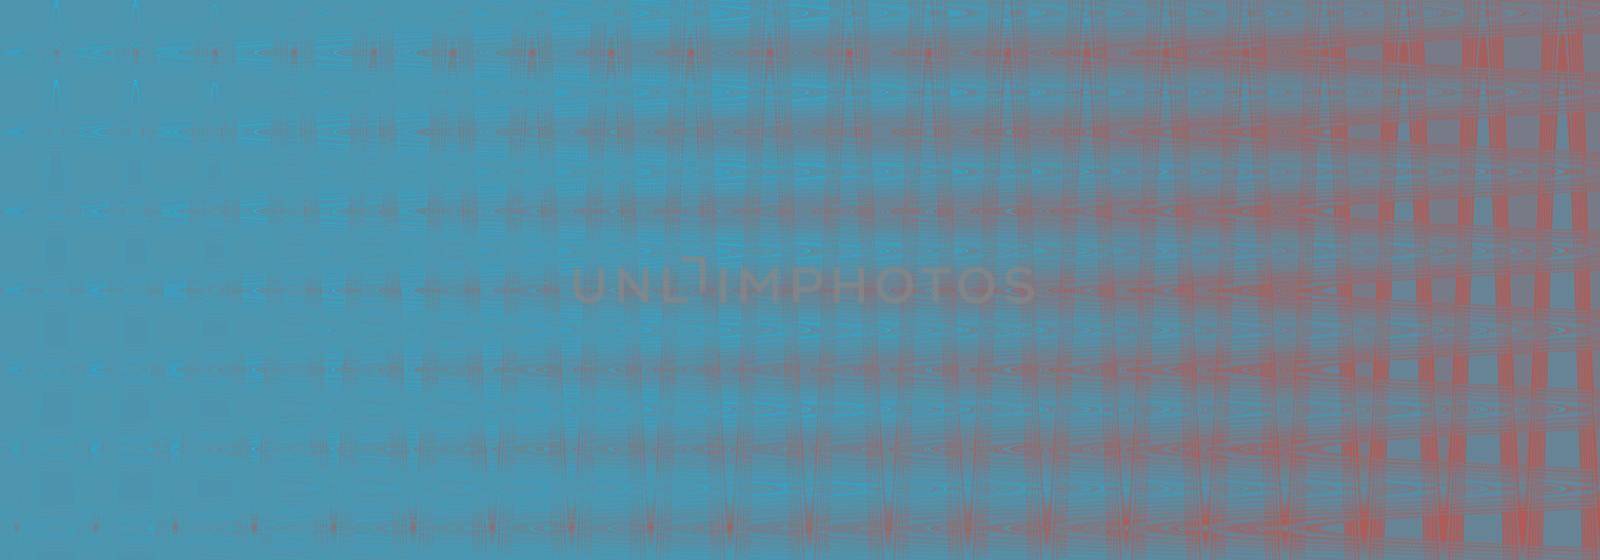 Abstract light unusual light blue green red background by paca-waca